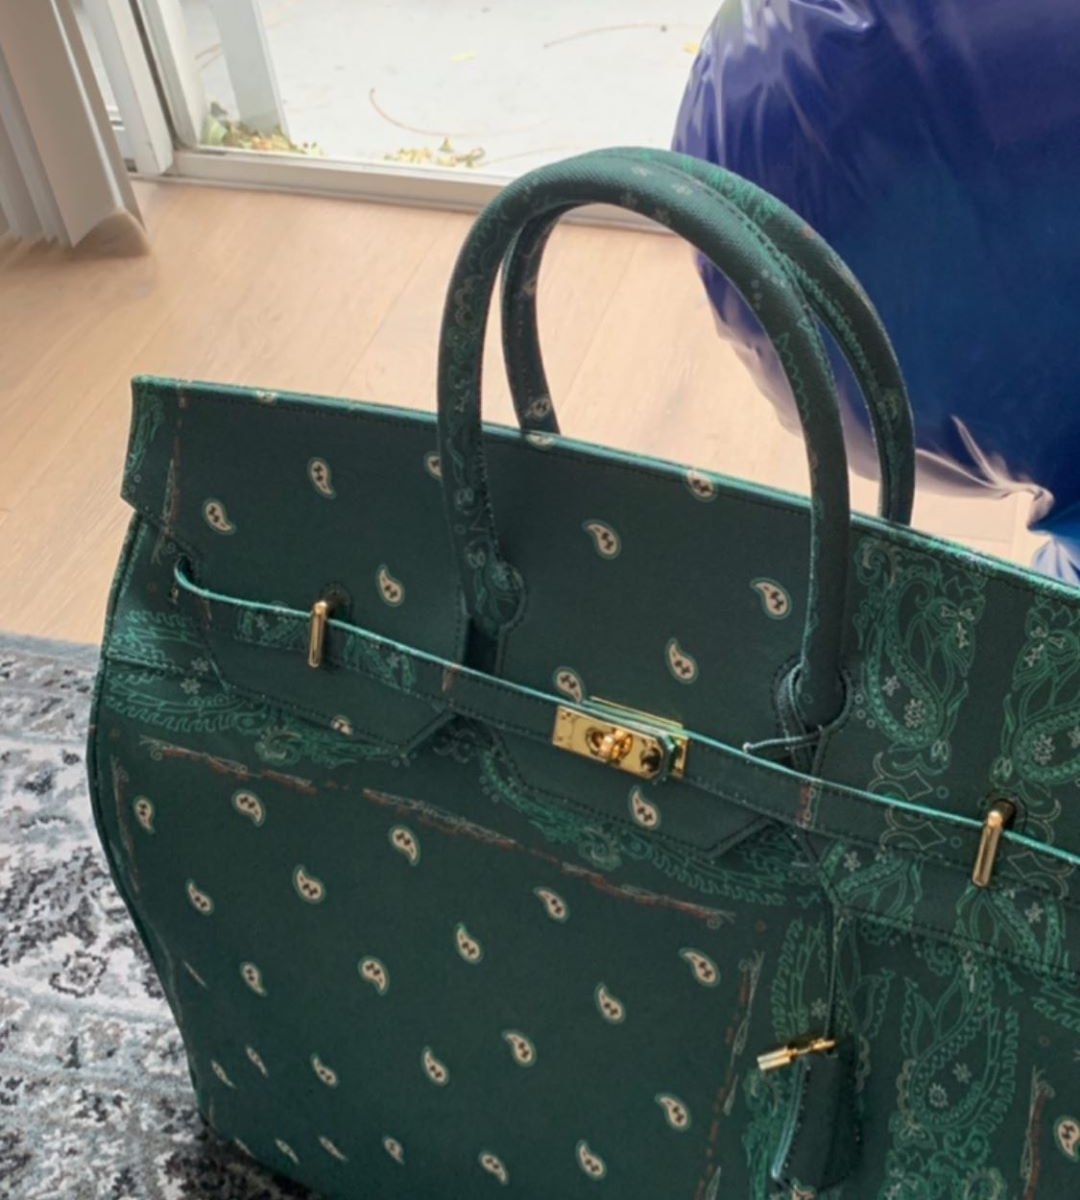 This Is How Many Hermes Birkin Bags Kylie Jenner Owns